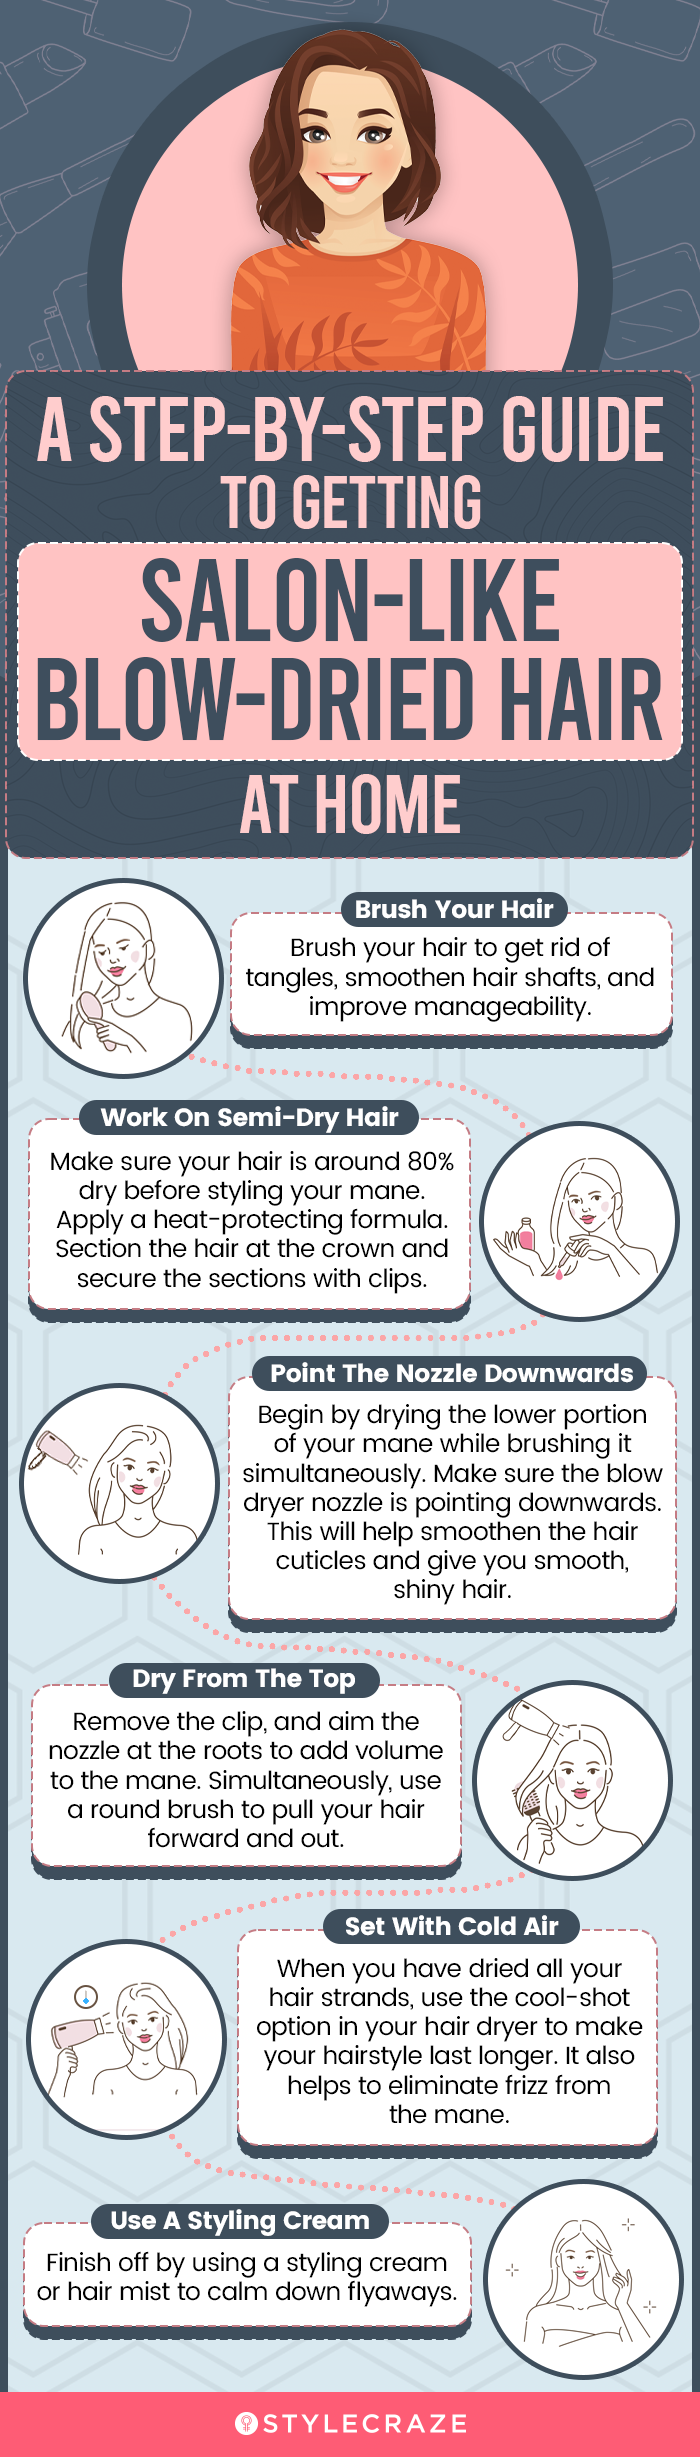 Step-By-Step Guide To Getting Salon-Like Blow-Dried Hair At Home (infographic)